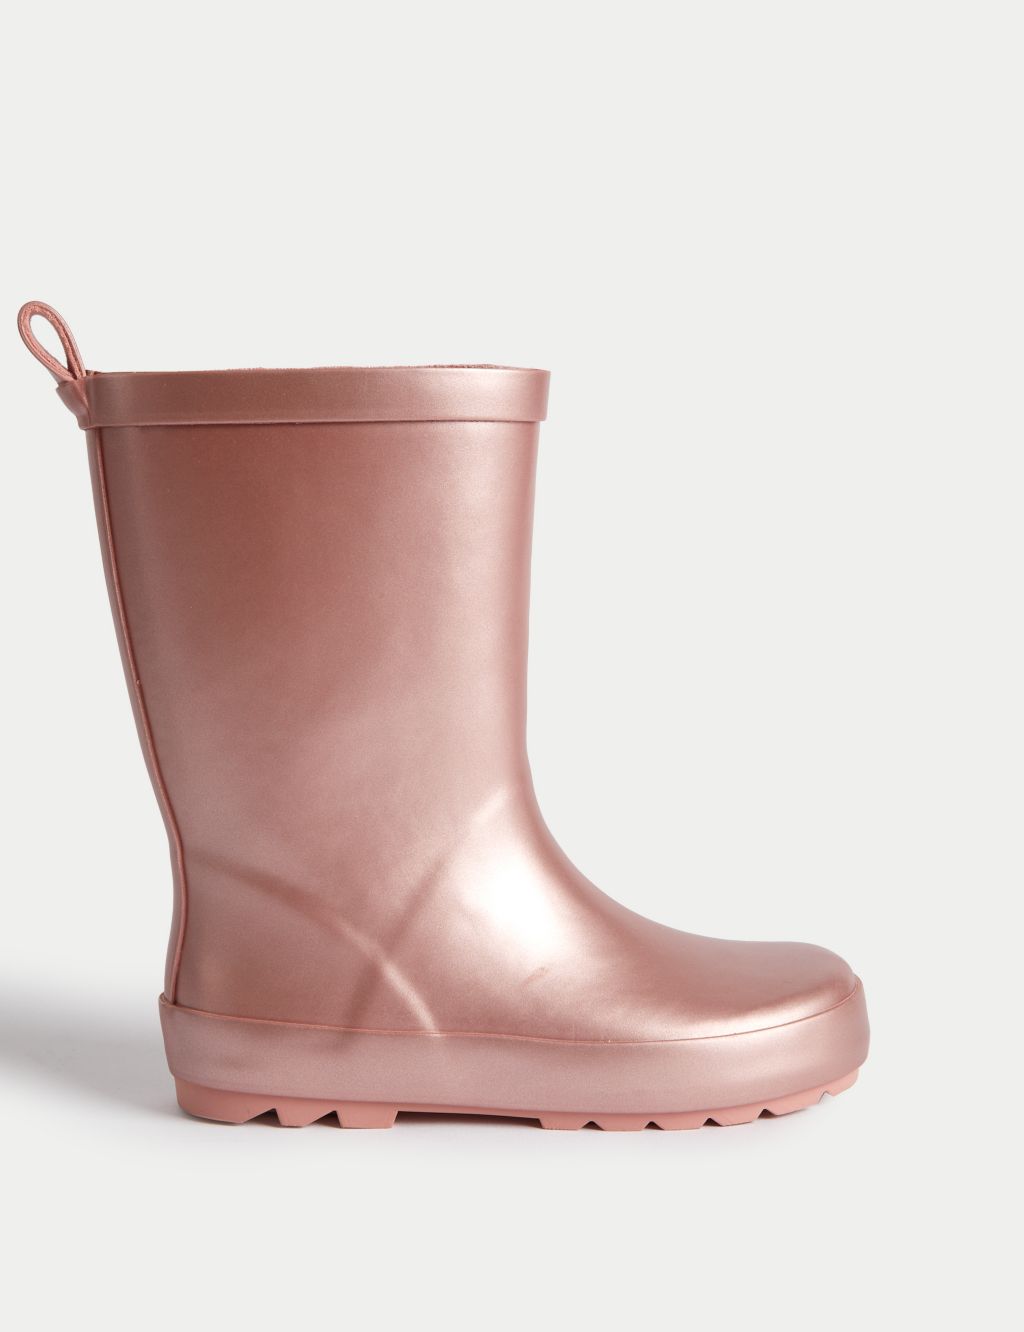 Kids' Metallic Wellies (4 Small - 6 Large) | M&S Collection | M&S